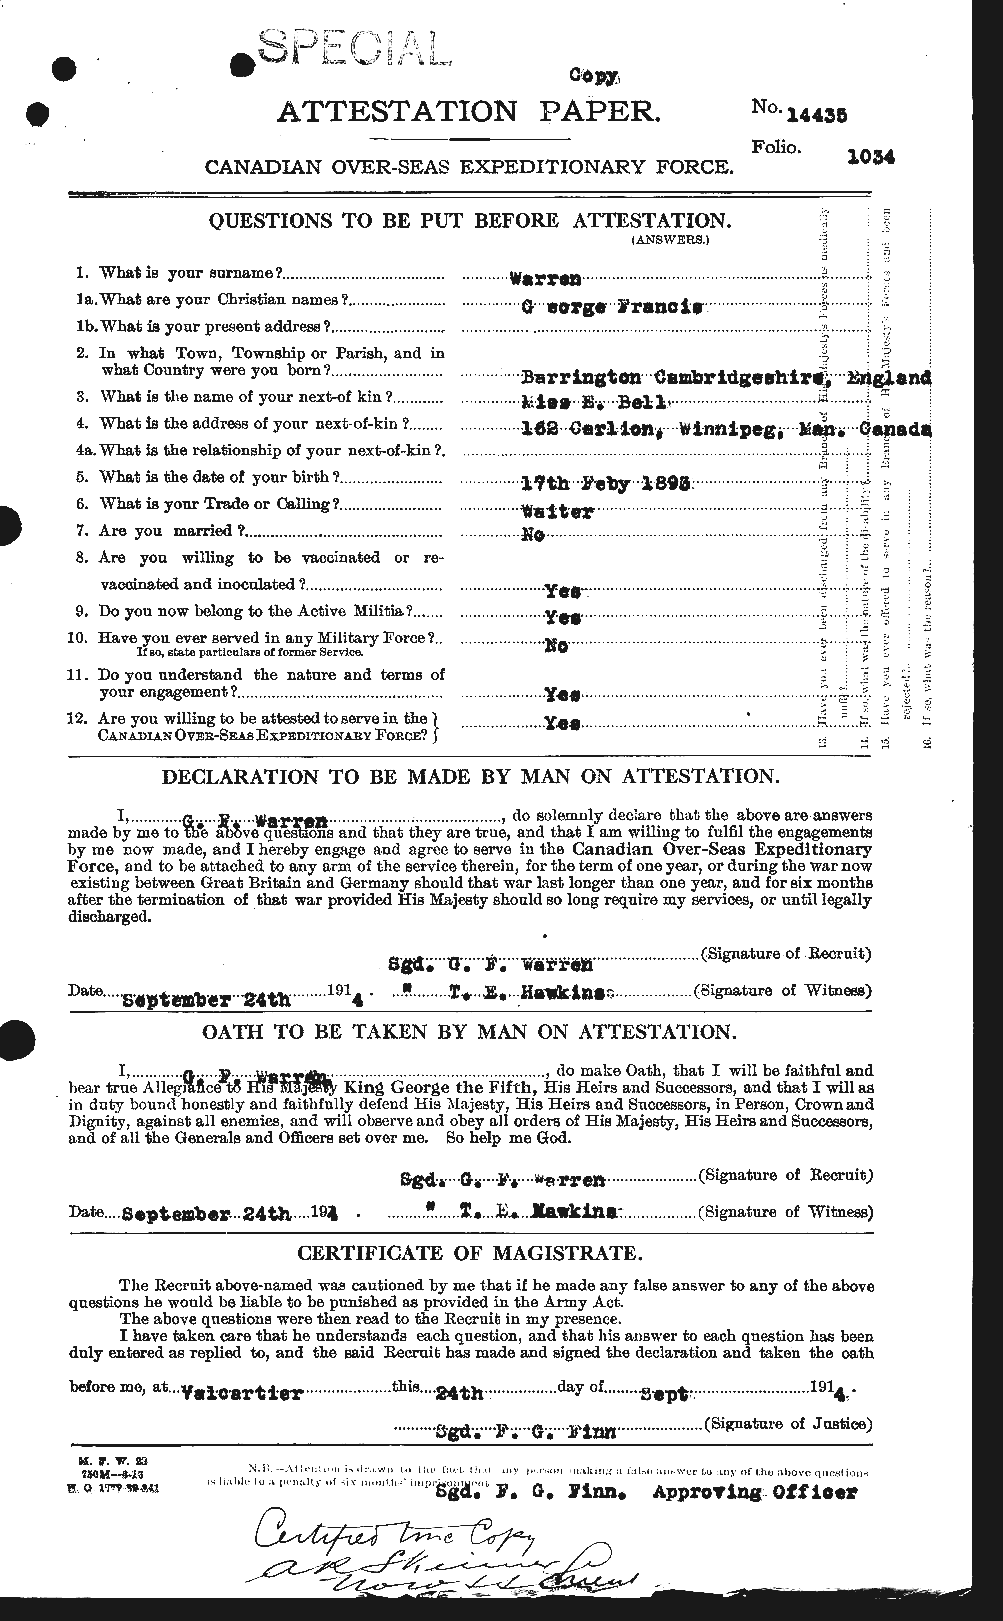 Personnel Records of the First World War - CEF 658462a